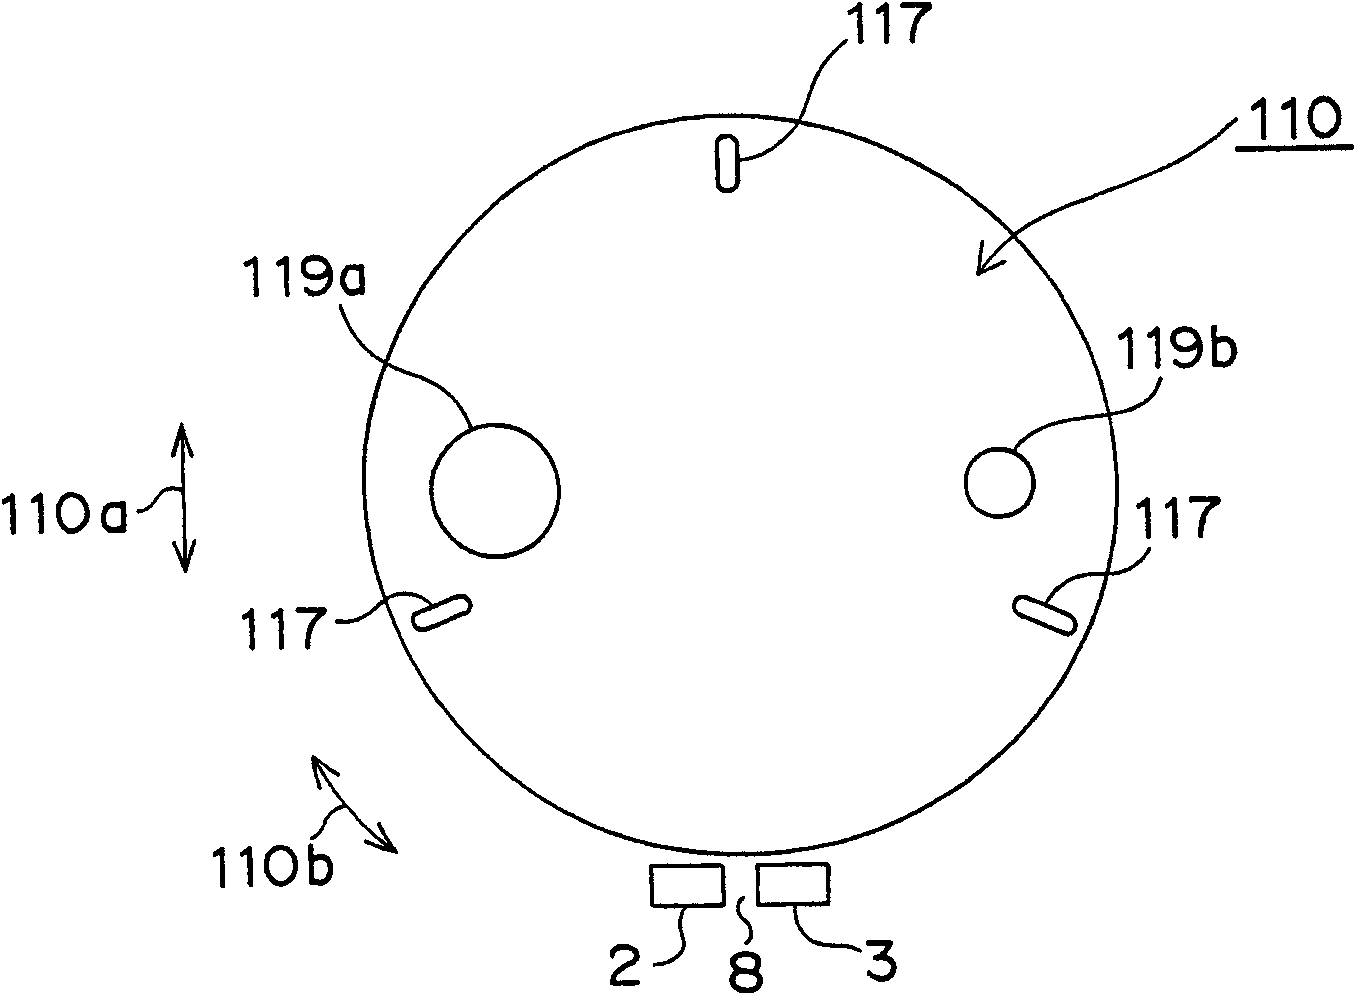 Top cover for a metal drum and metal drum